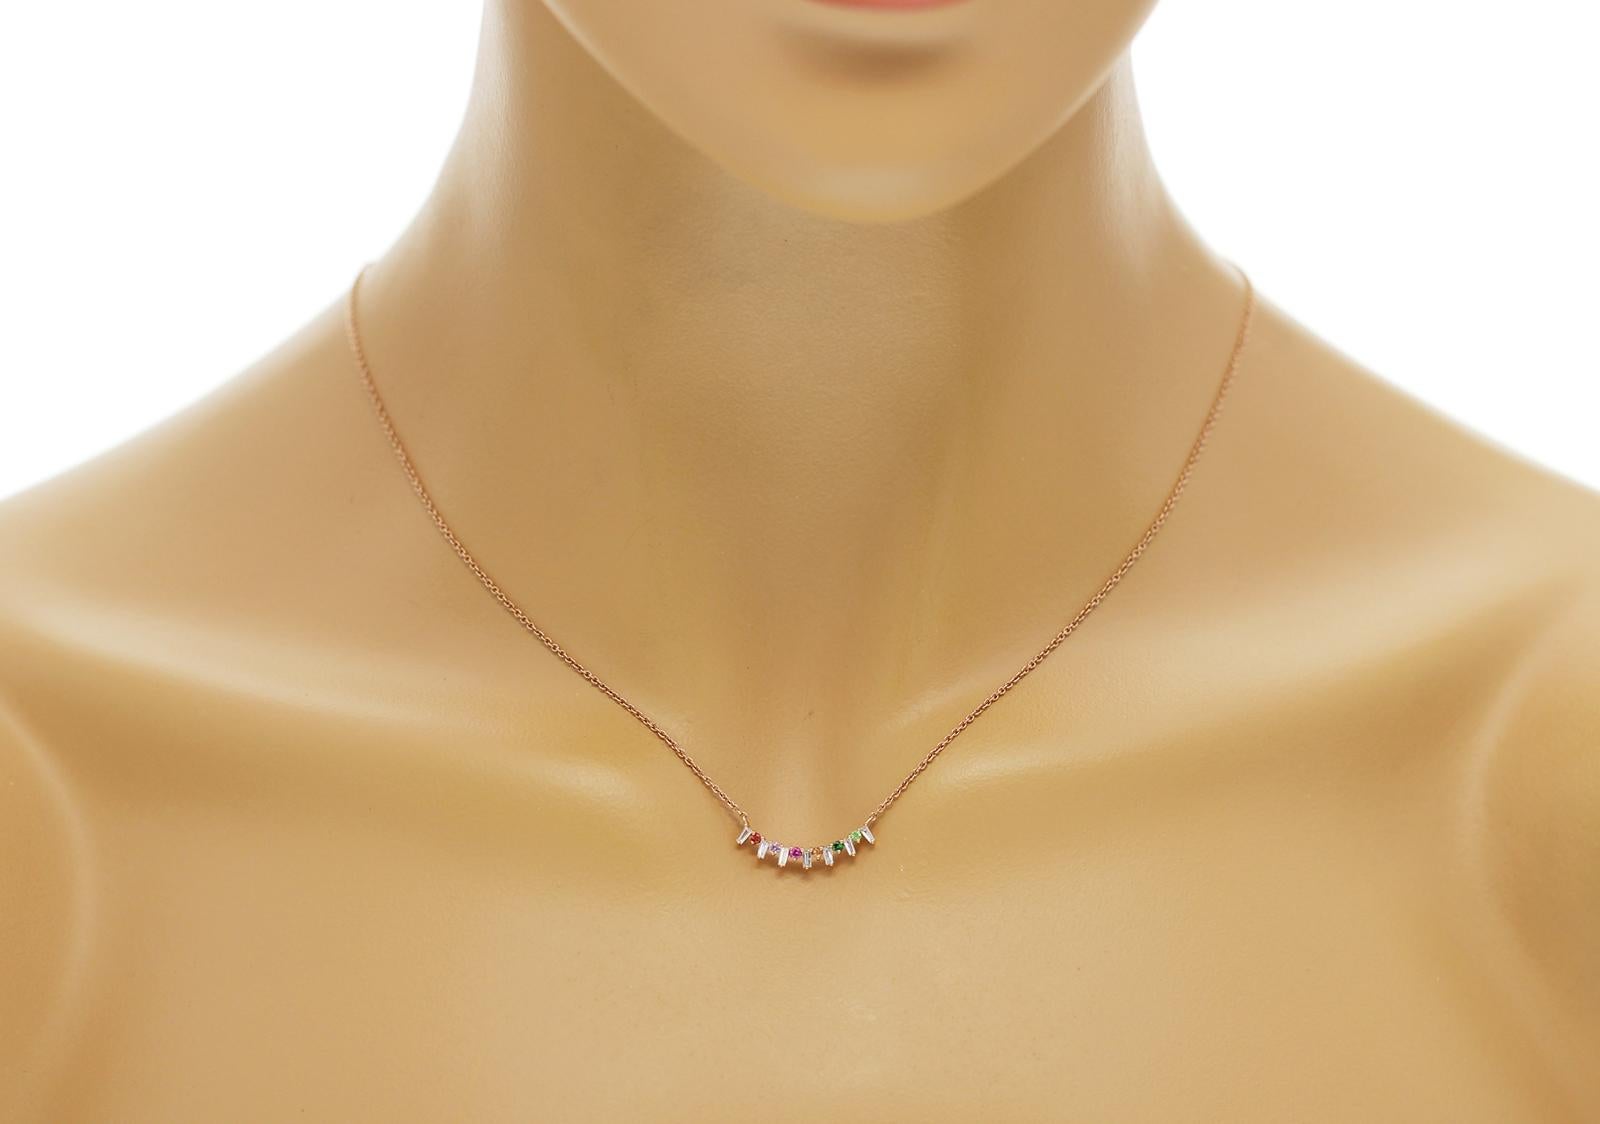 100% Authentic, 100% Customer Satisfaction

Pendant: 20 mm

Chain: 1 mm

Size: 16-18 Inches

Metal: 14K Rose Gold

Hallmarks: 14K

Total Weight: 2.04 Grams

Stone Type: 014 CT Natural Sapphire &  Diamond 0.18 CT  G   SI1

Condition: New With Tag